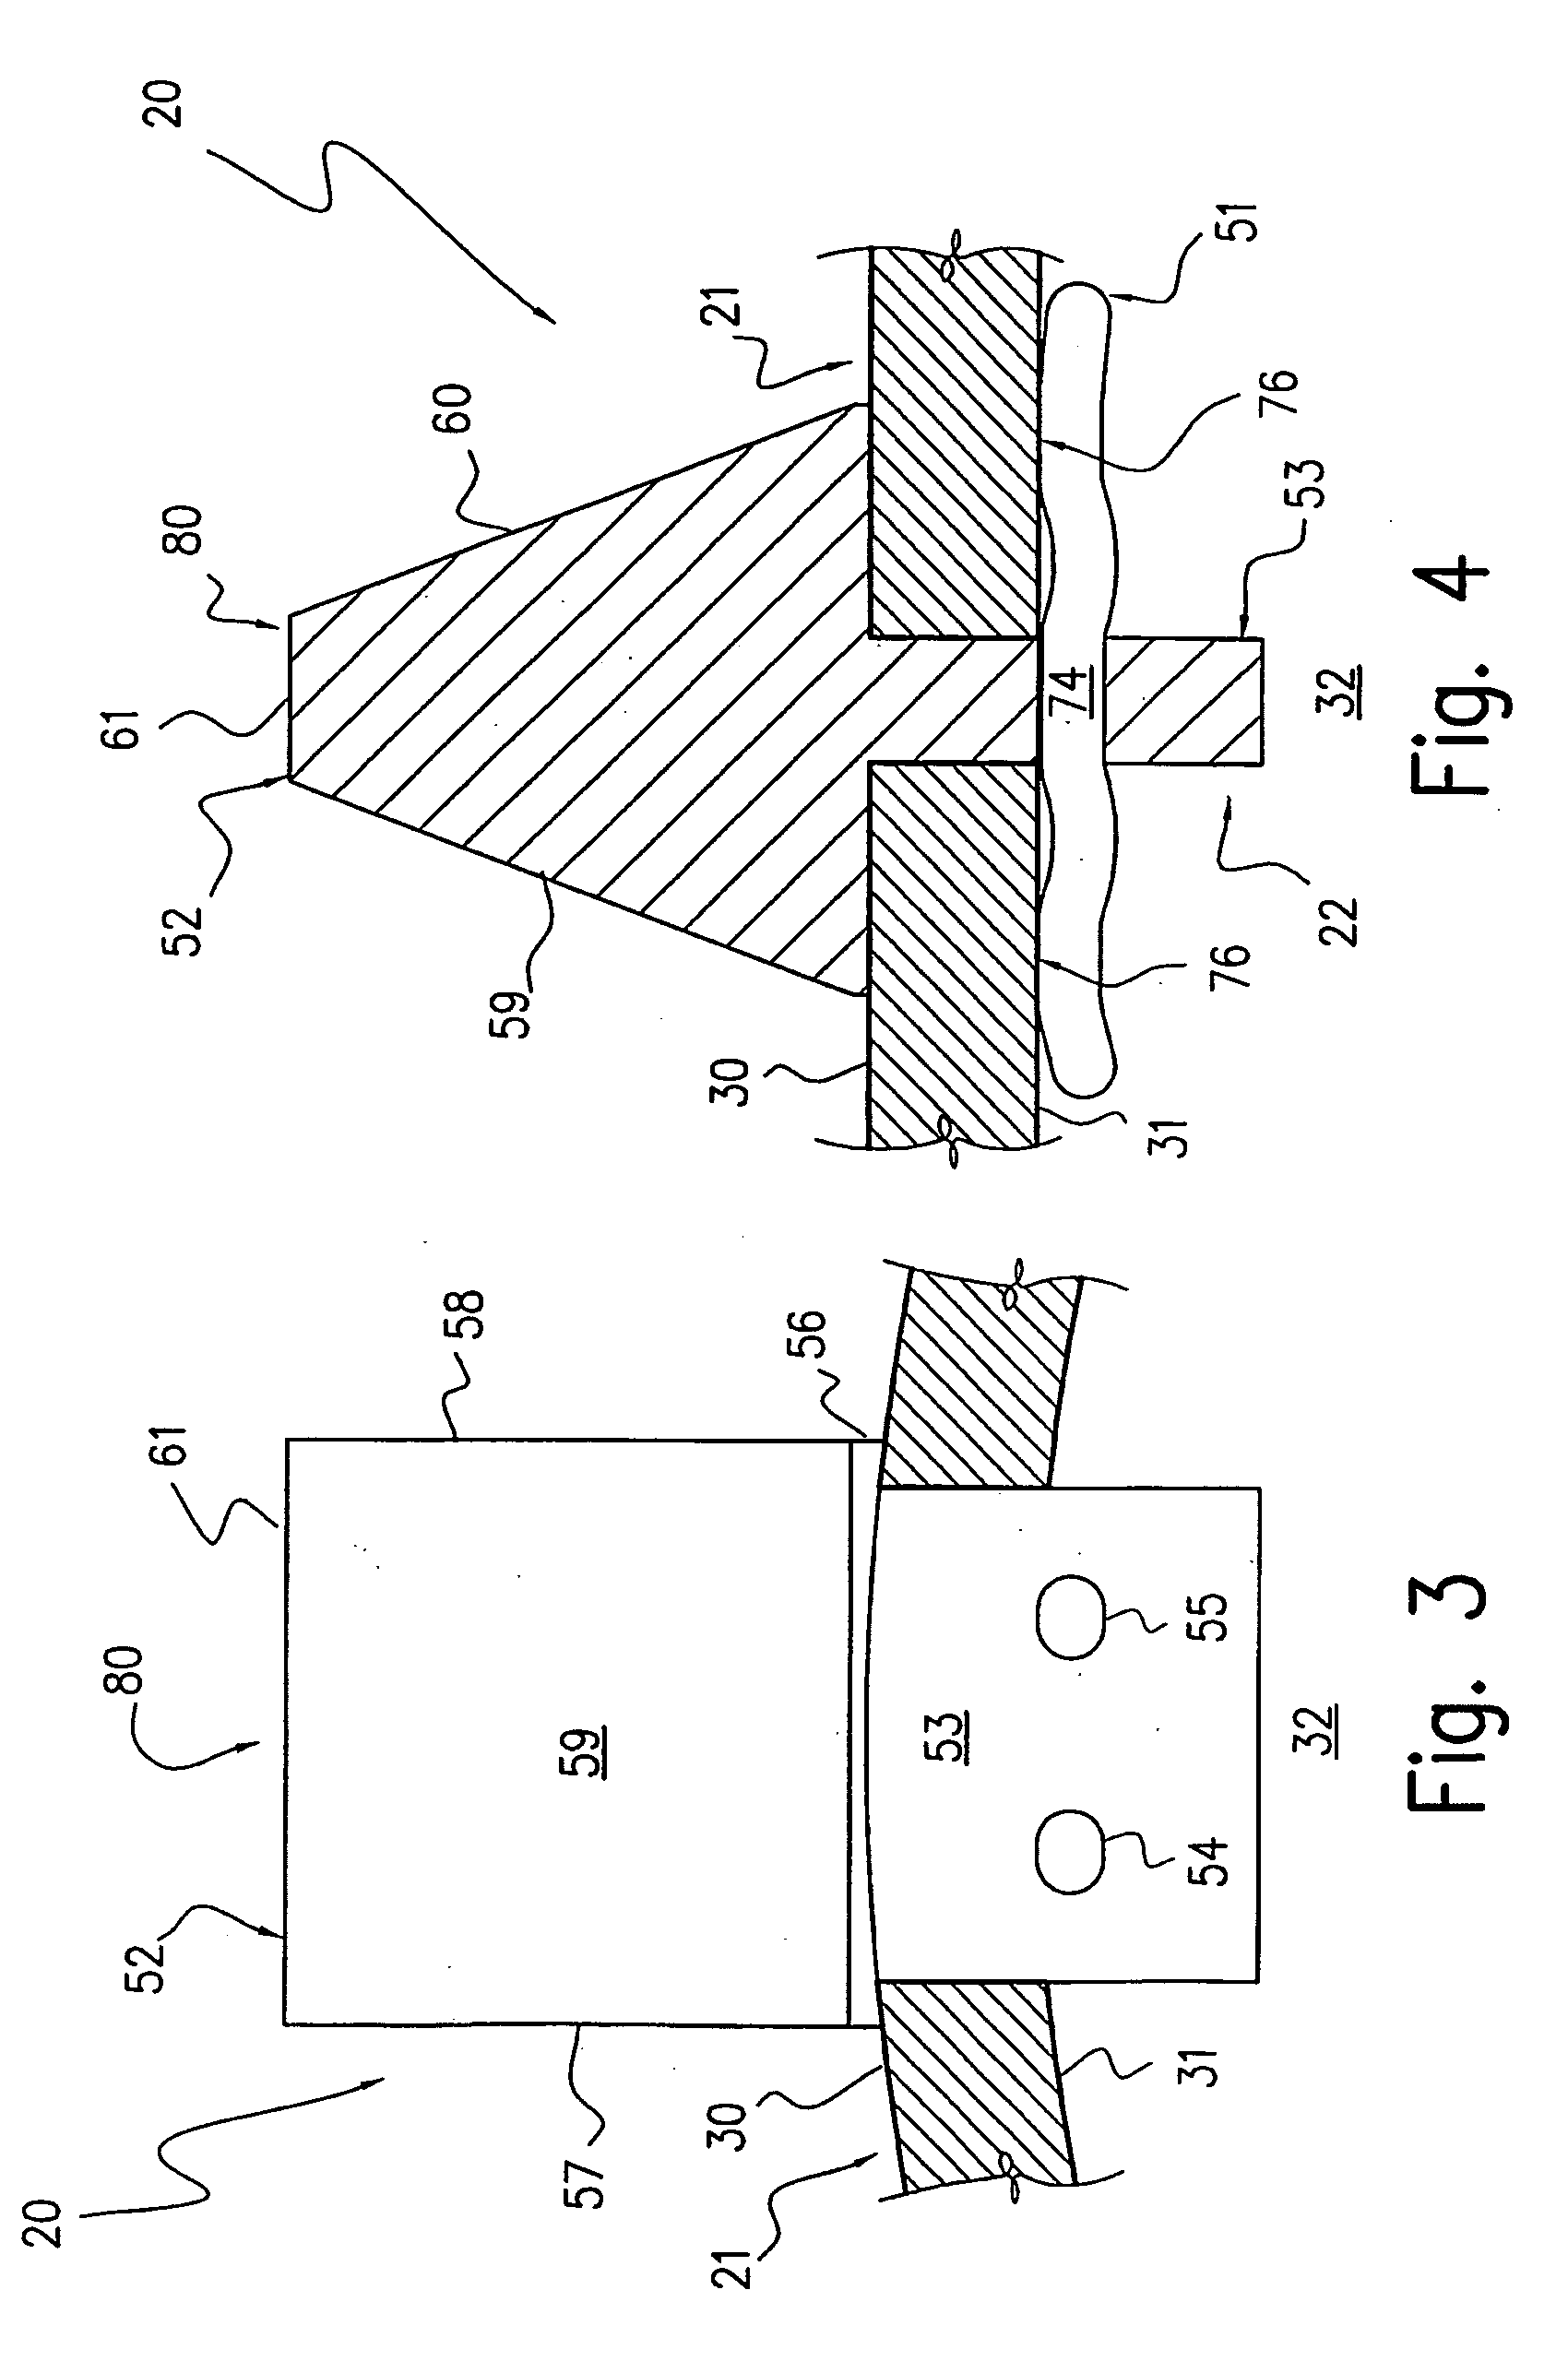 Compaction wheel and cleat assembly therefor